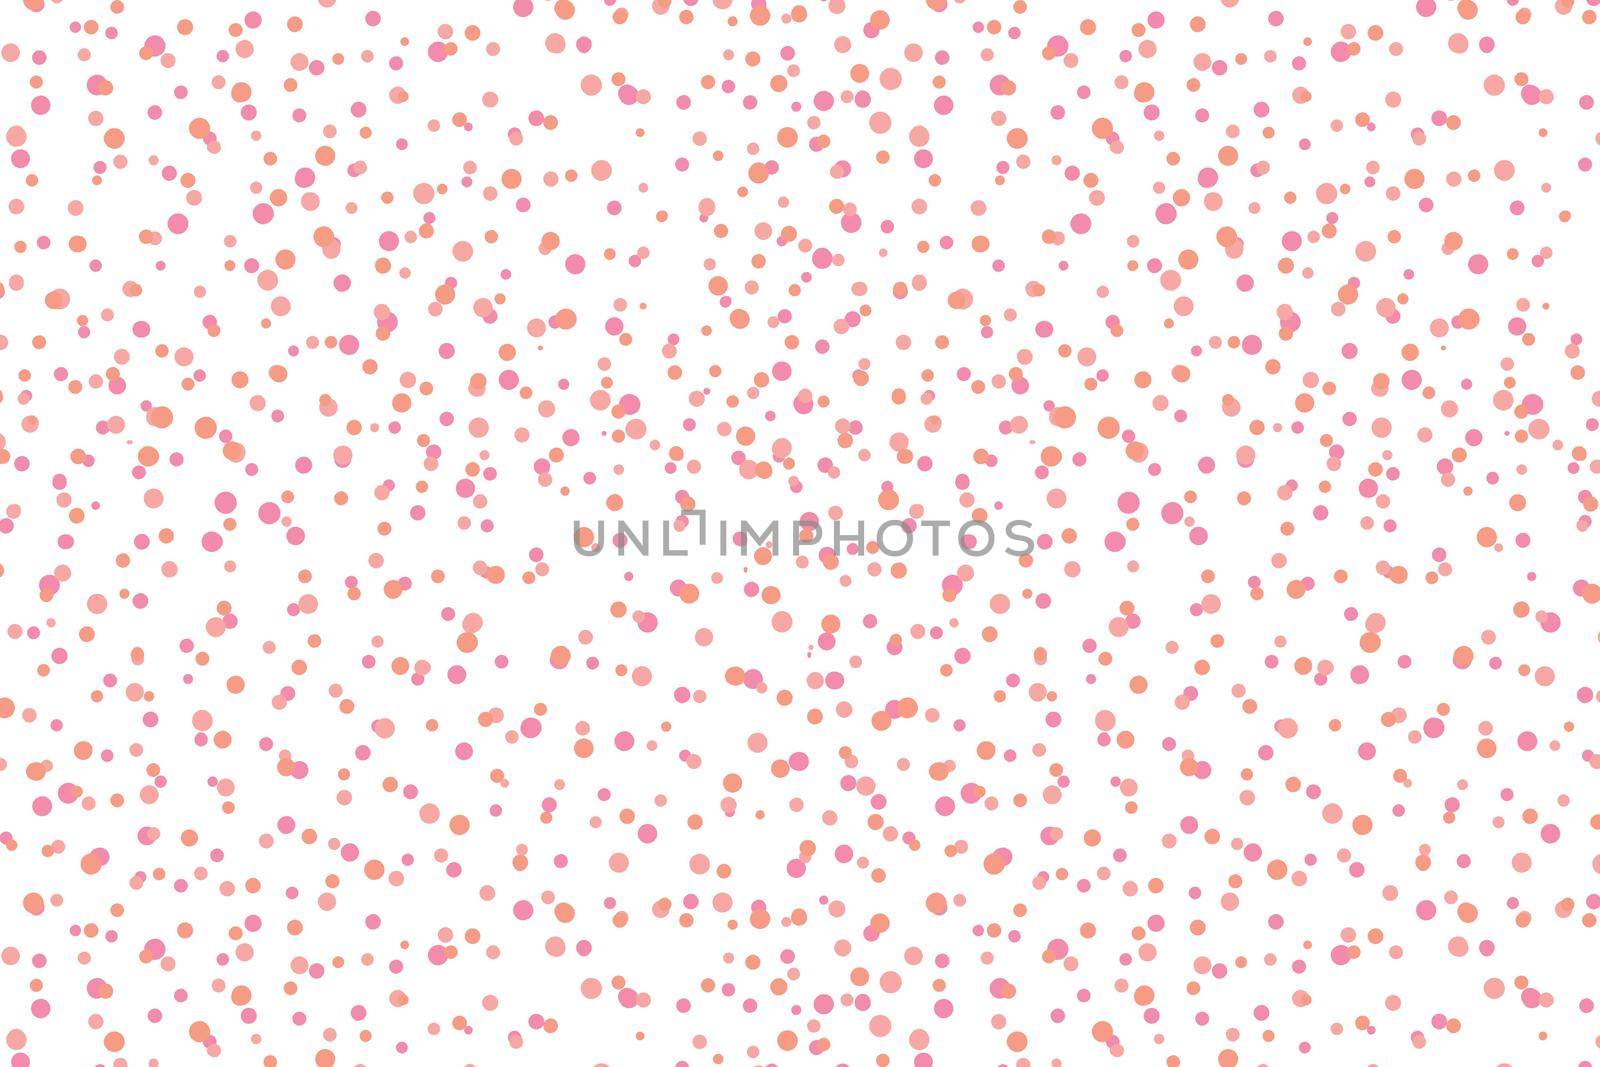 Light multicolor background, colorful vector texture with circles. Splash effect banner. Glitter silver dot abstract illustration with blurred drops of rain. Pattern for banner,poster, card.